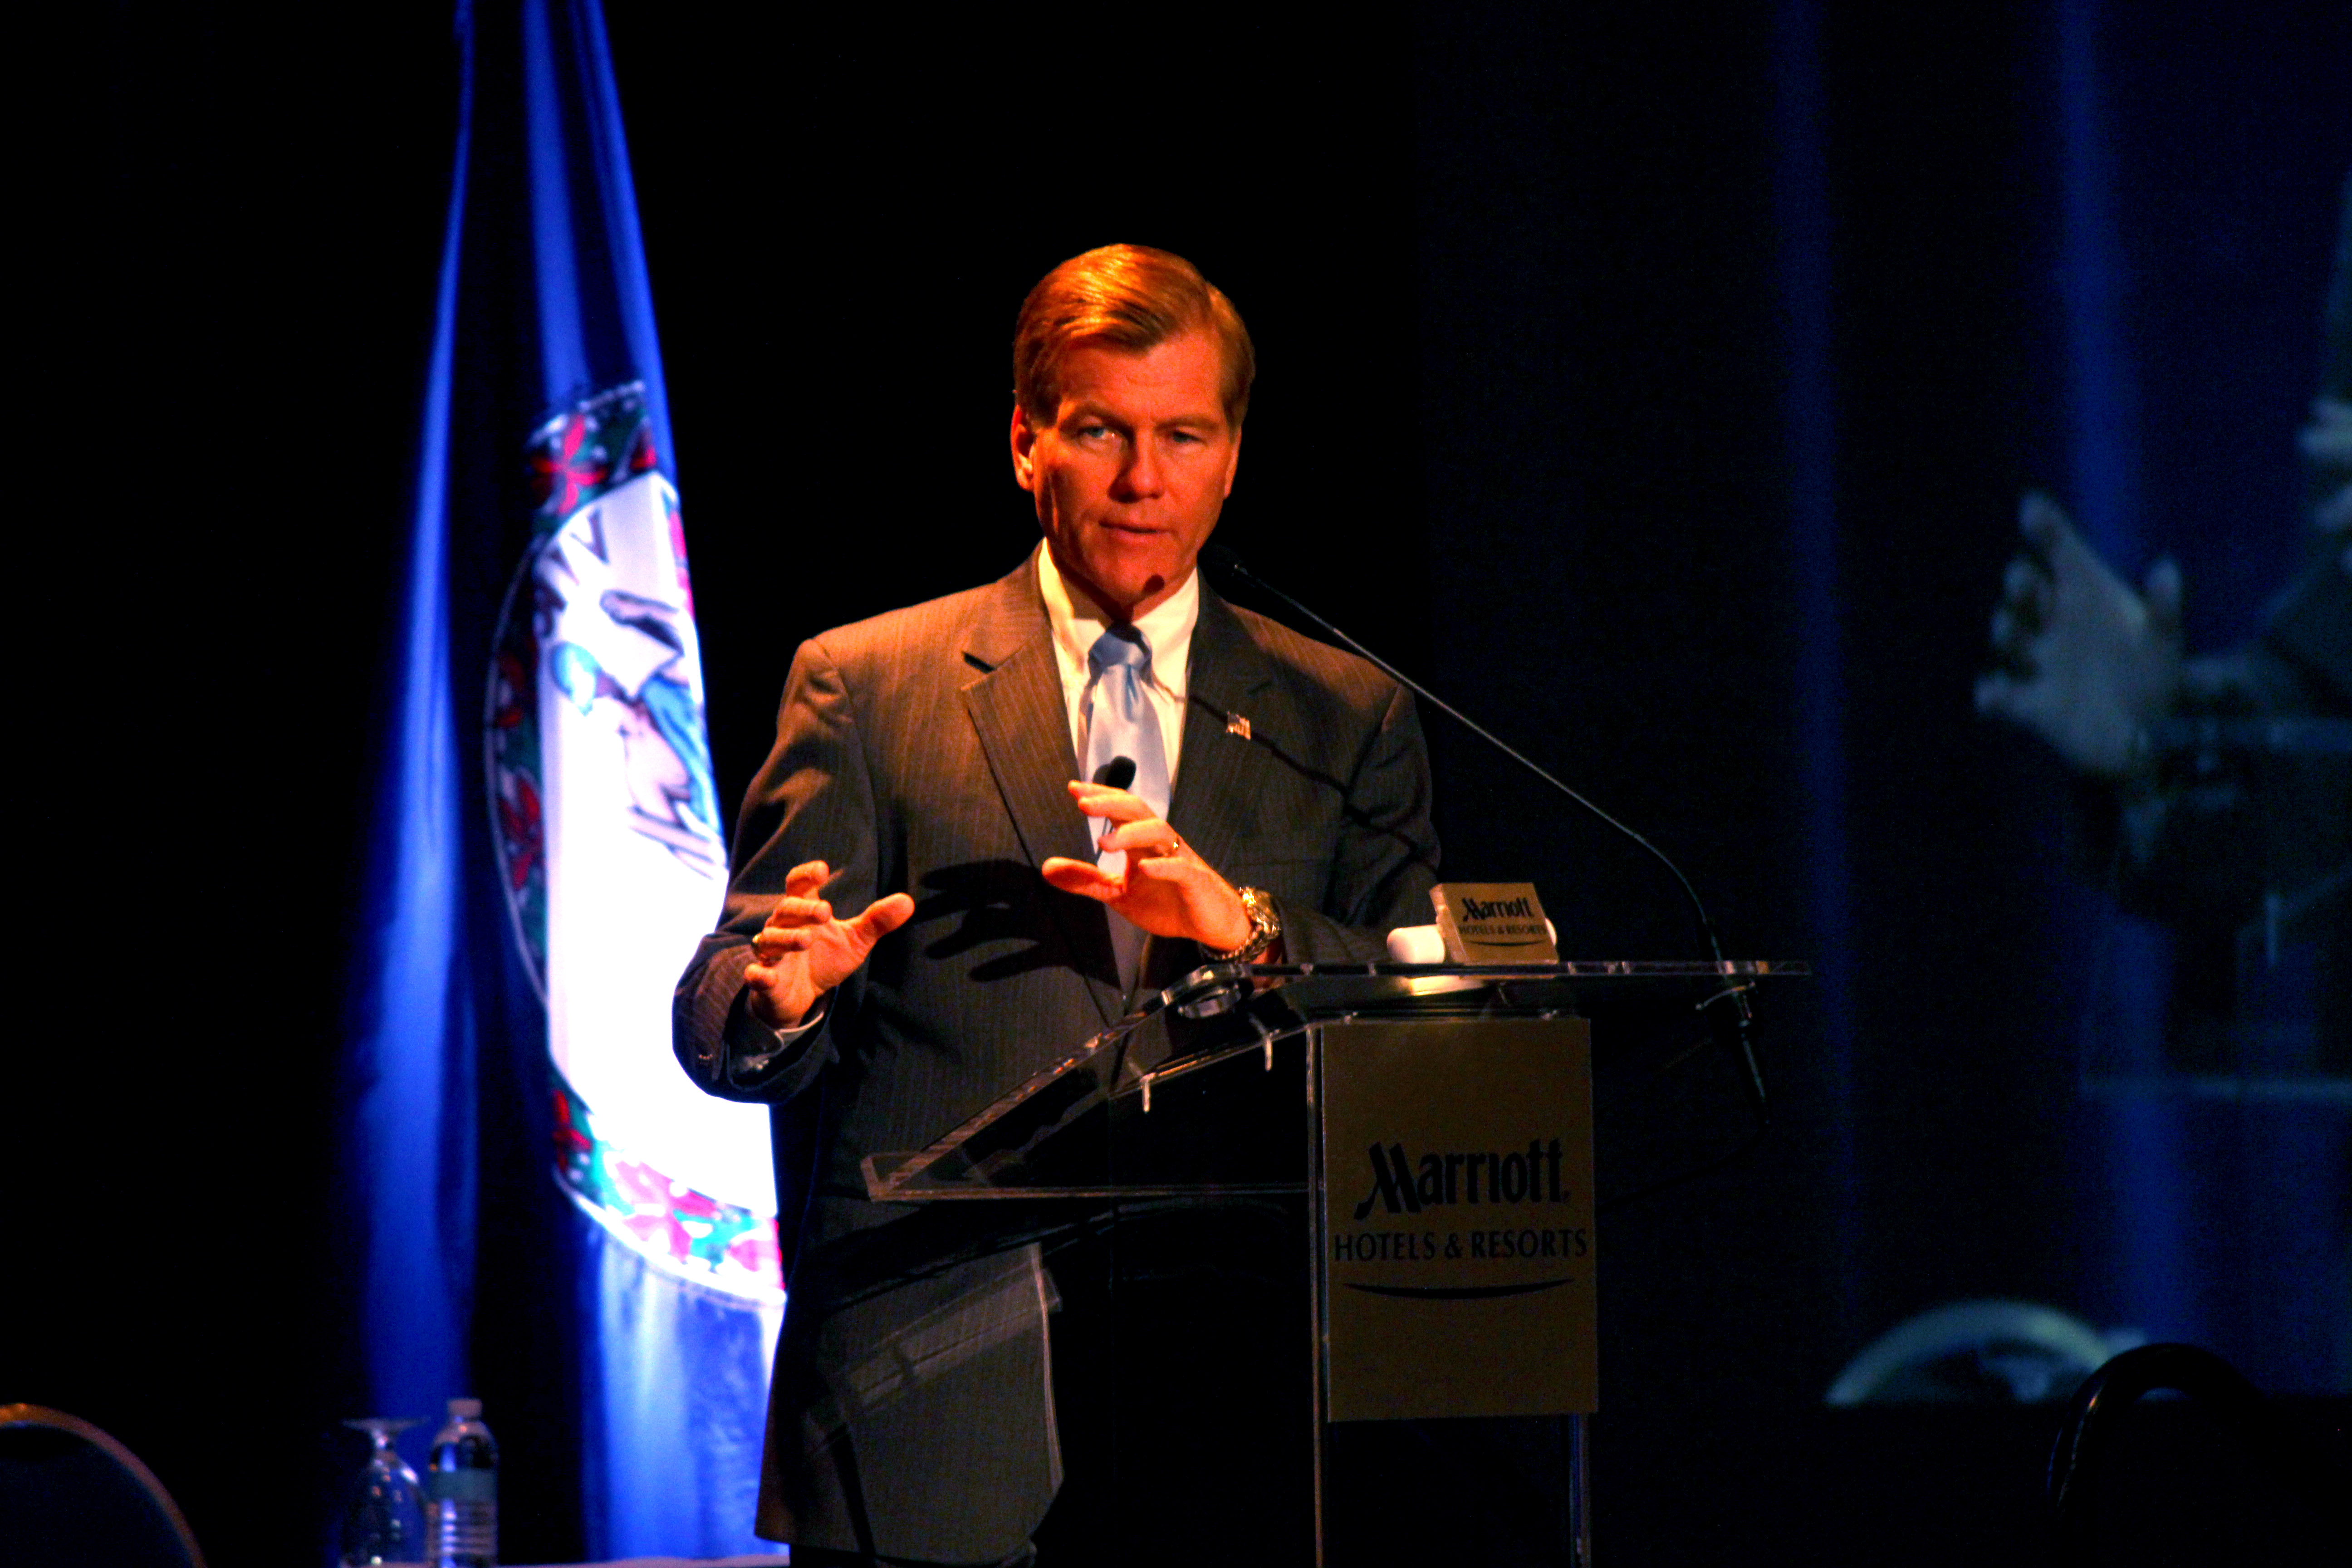 Gov. Robert F. McDonnell speaking to a crowd from a podium